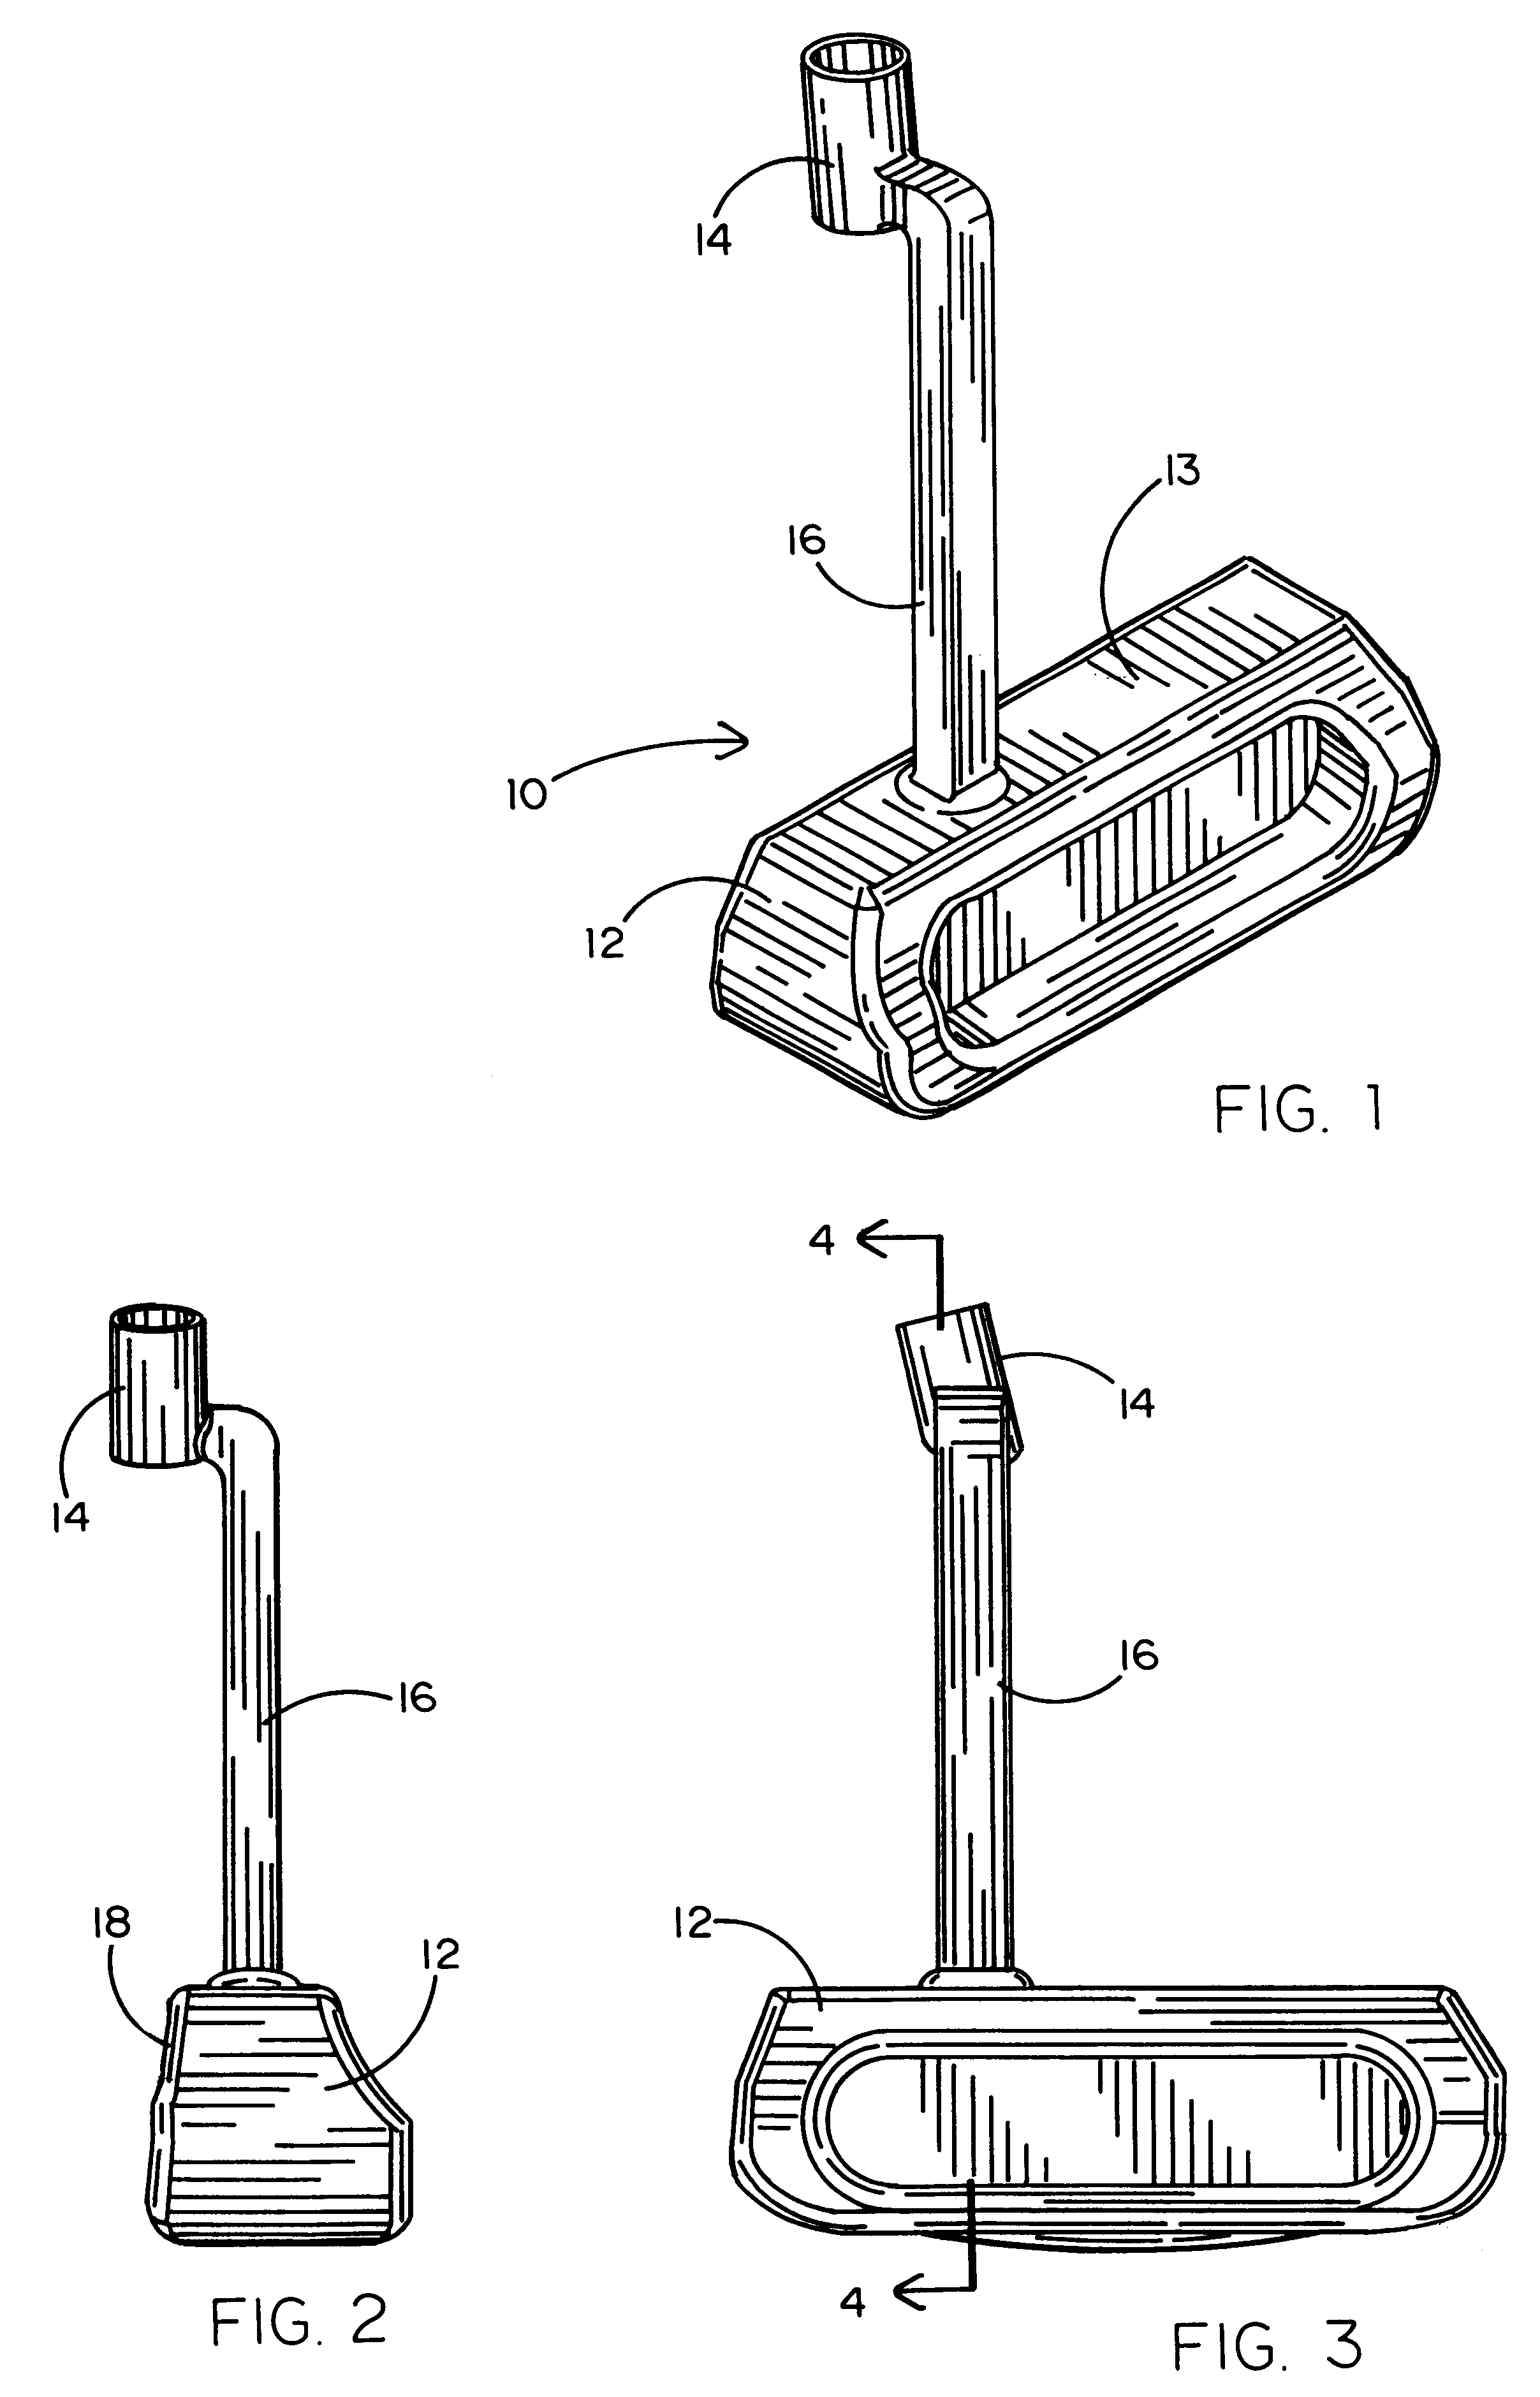 Device for altering the angle between the shaft and the head of a golf club